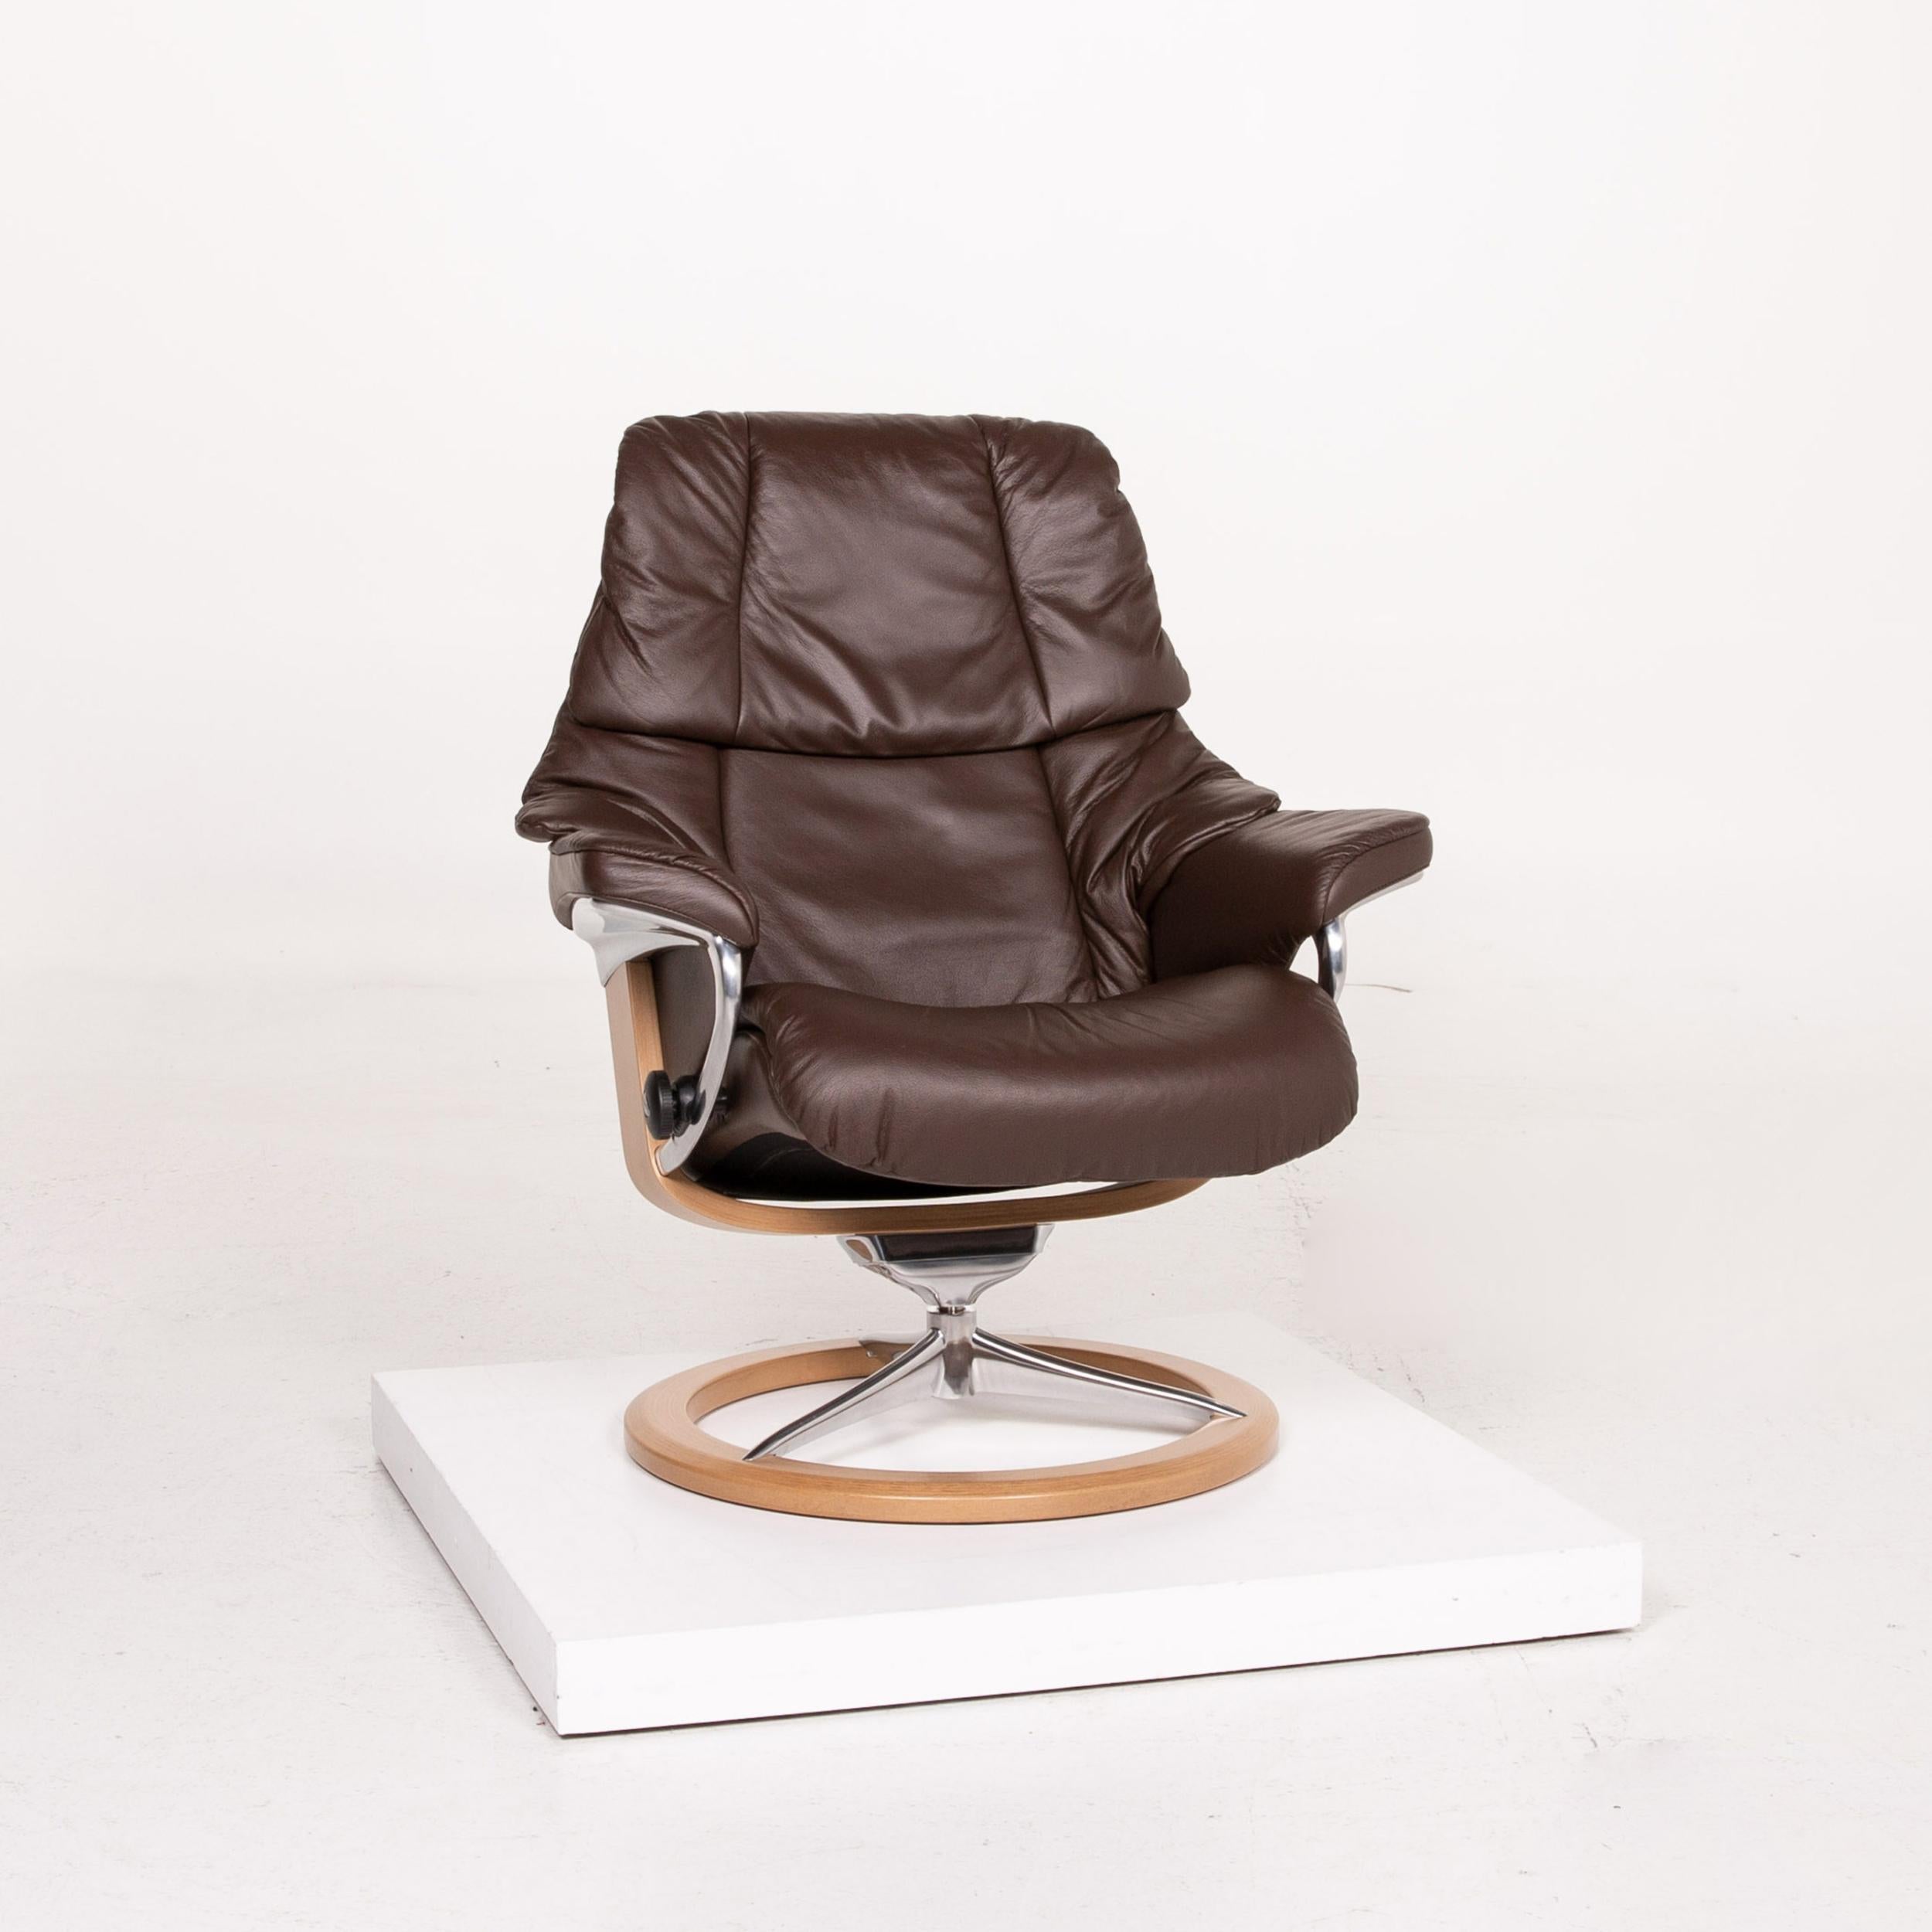 Stressless Reno Leather Armchair Incl. Stool Dark Brown Brown Relaxation 4